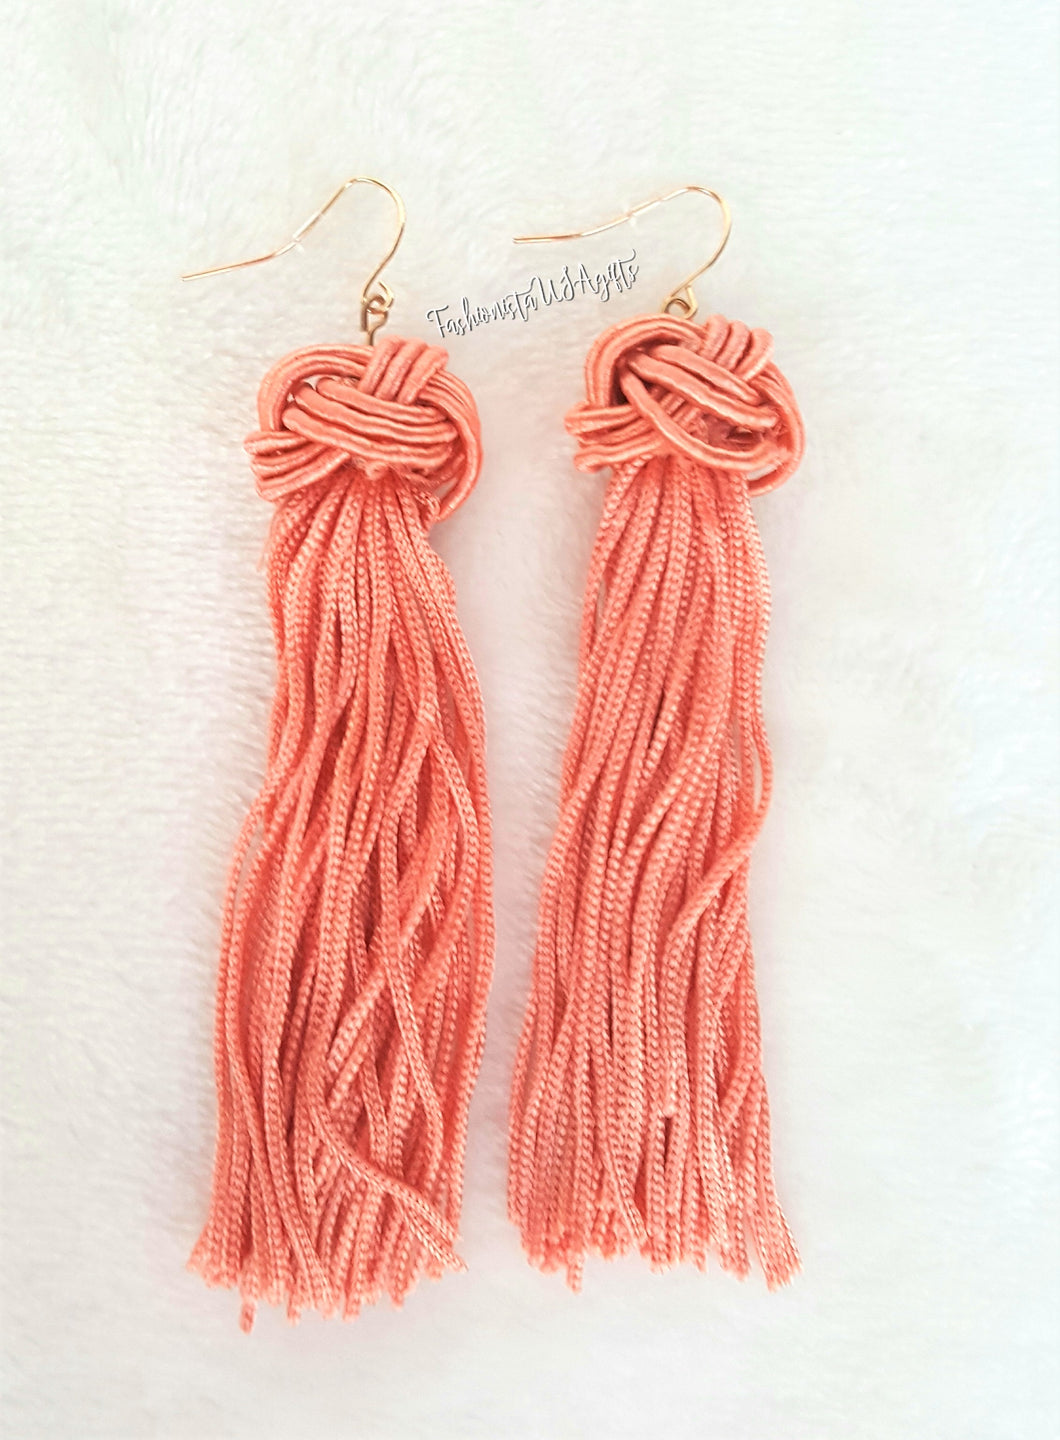 Earrings Knotted Tassel Coral, Boho Earrings, Beach Earrings, Chic Fashion Earrings, Statement Earring, Gifts for Her - Urban Flair USA